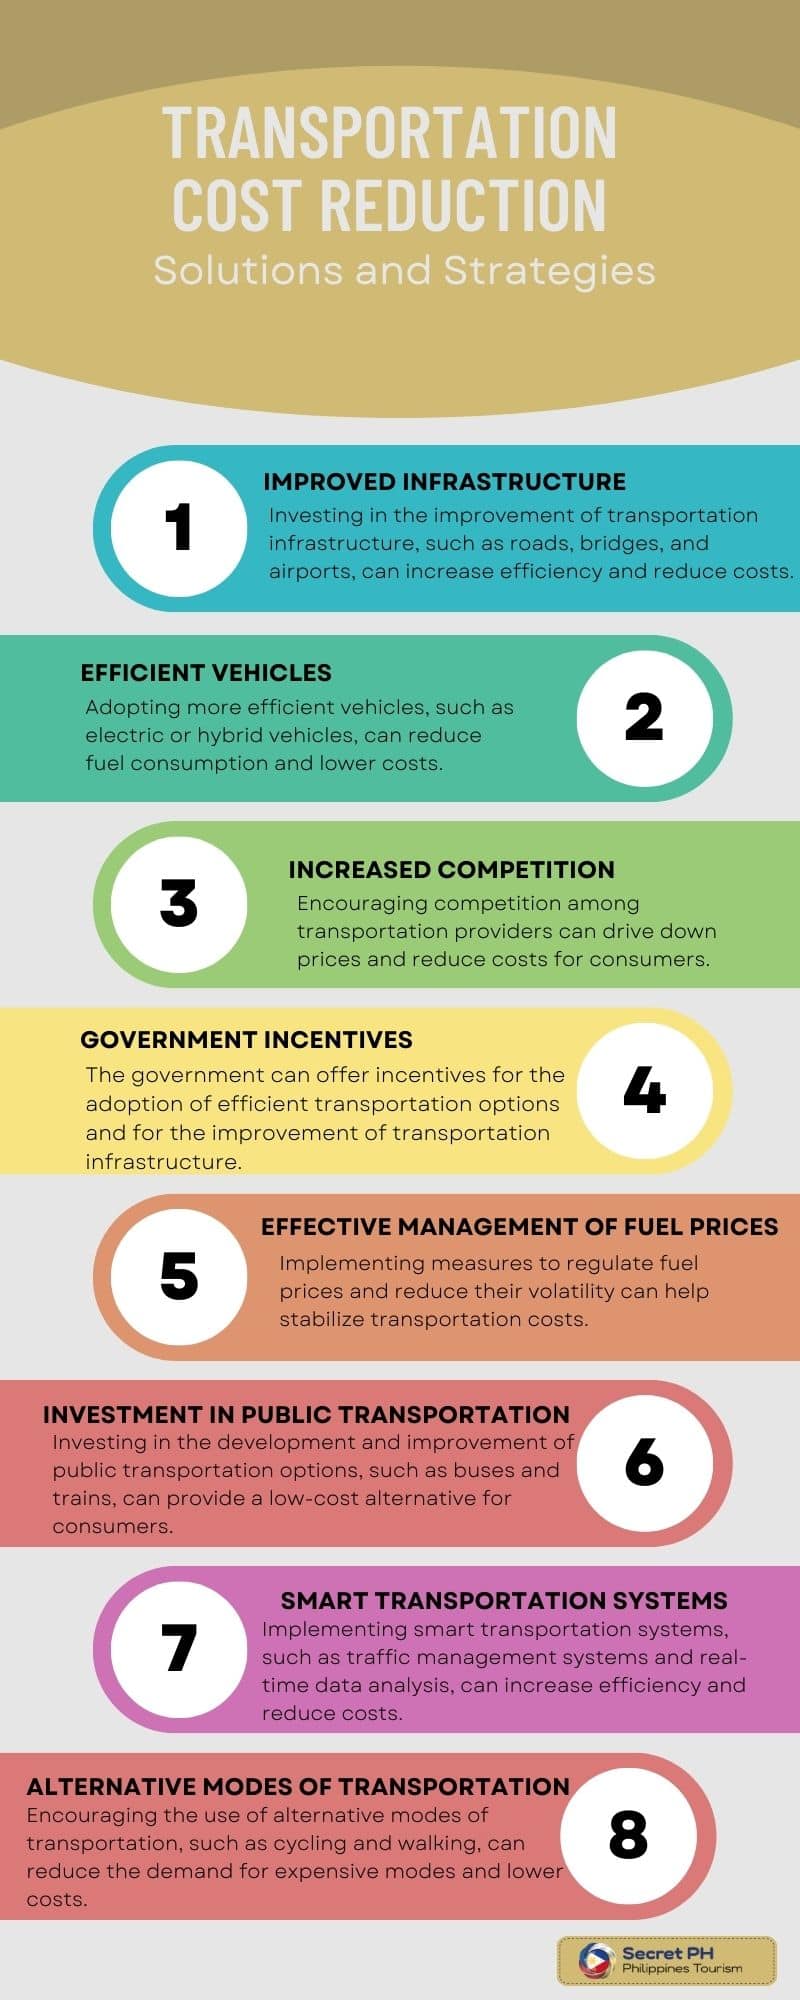 Transportation Cost Reduction in the Philippines Solutions and Strategies